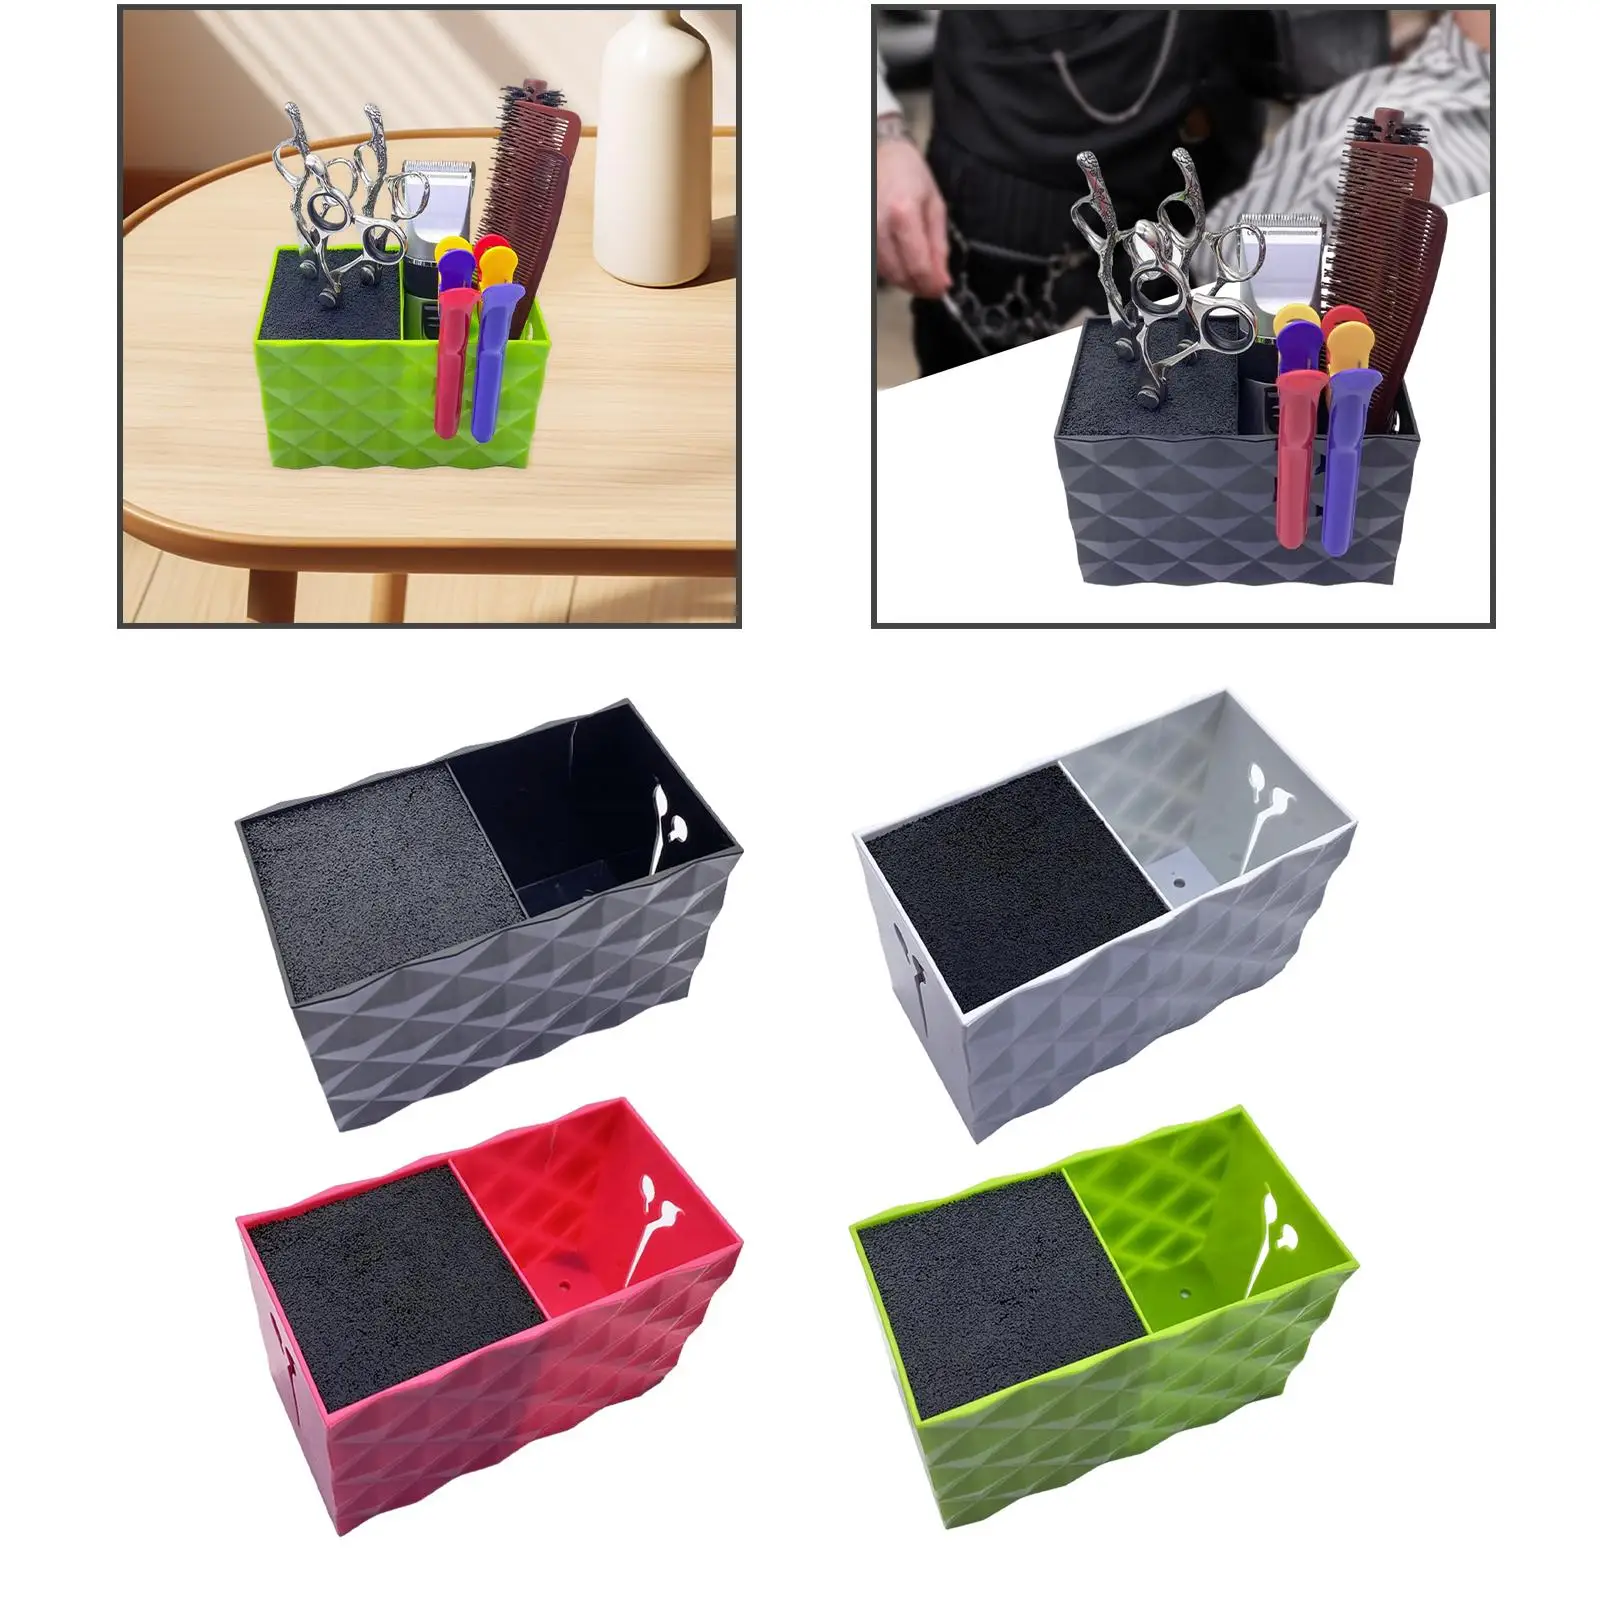 Hairdressing Tools Storage Box Hairdressing Scissors Holder Shears Block for Brushes Clips Salon Use Hairstyling Hair